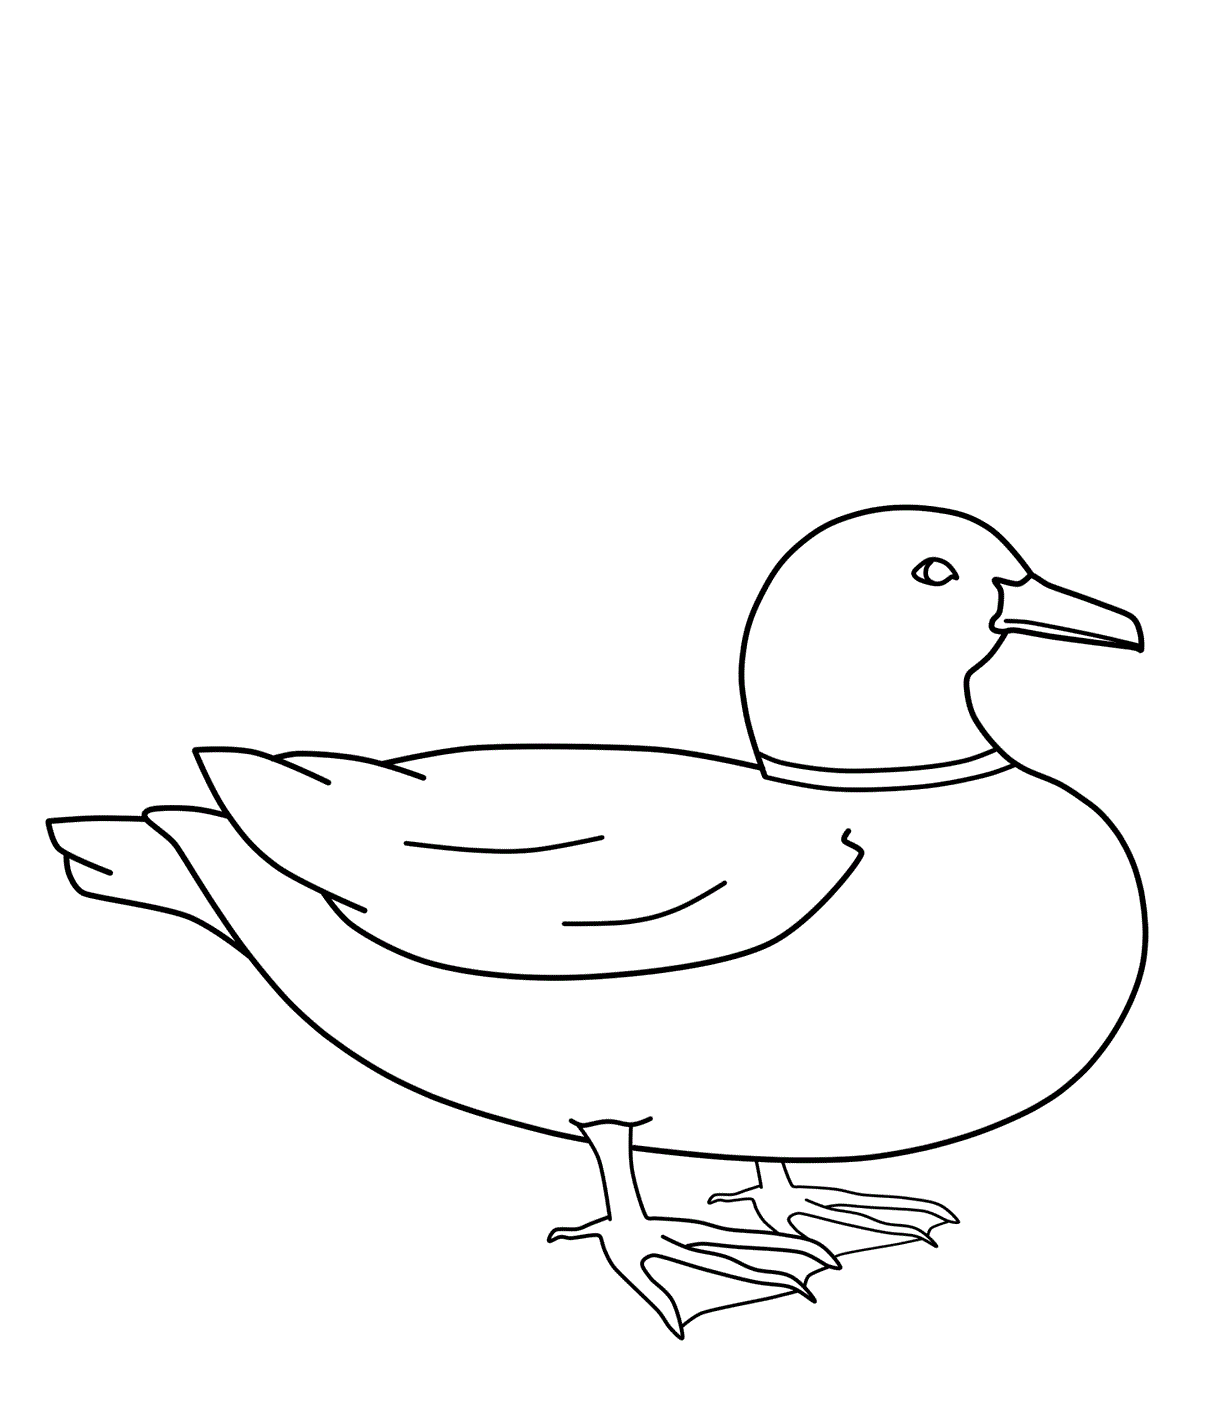 How to Draw a Duck - An Easy Duck Drawing Tutorial for All Artists